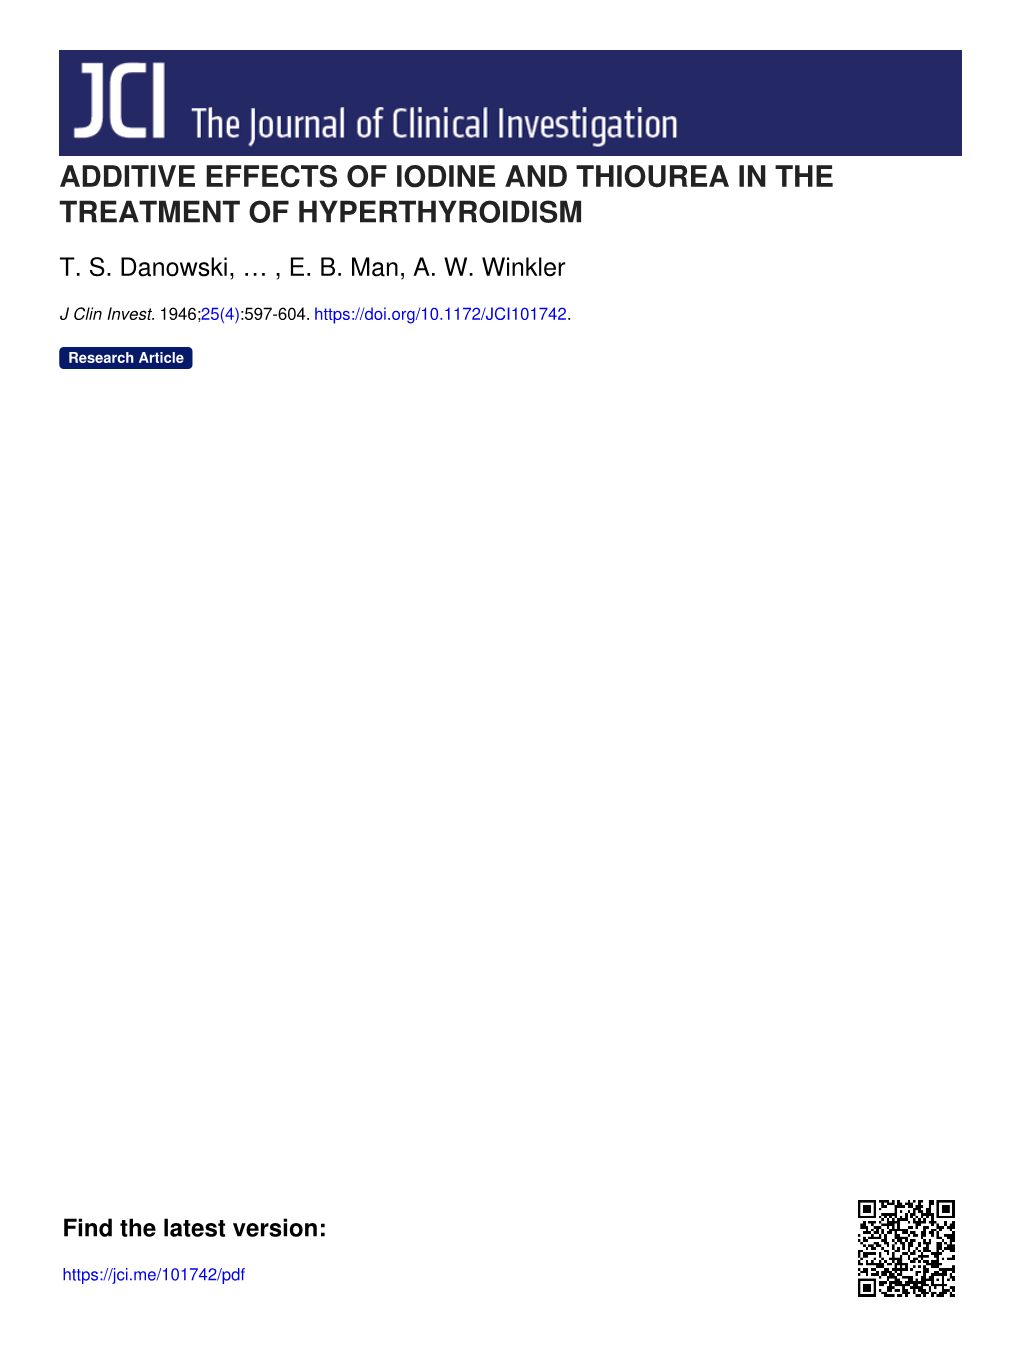 Additive Effects of Iodine and Thiourea in the Treatment of Hyperthyroidism